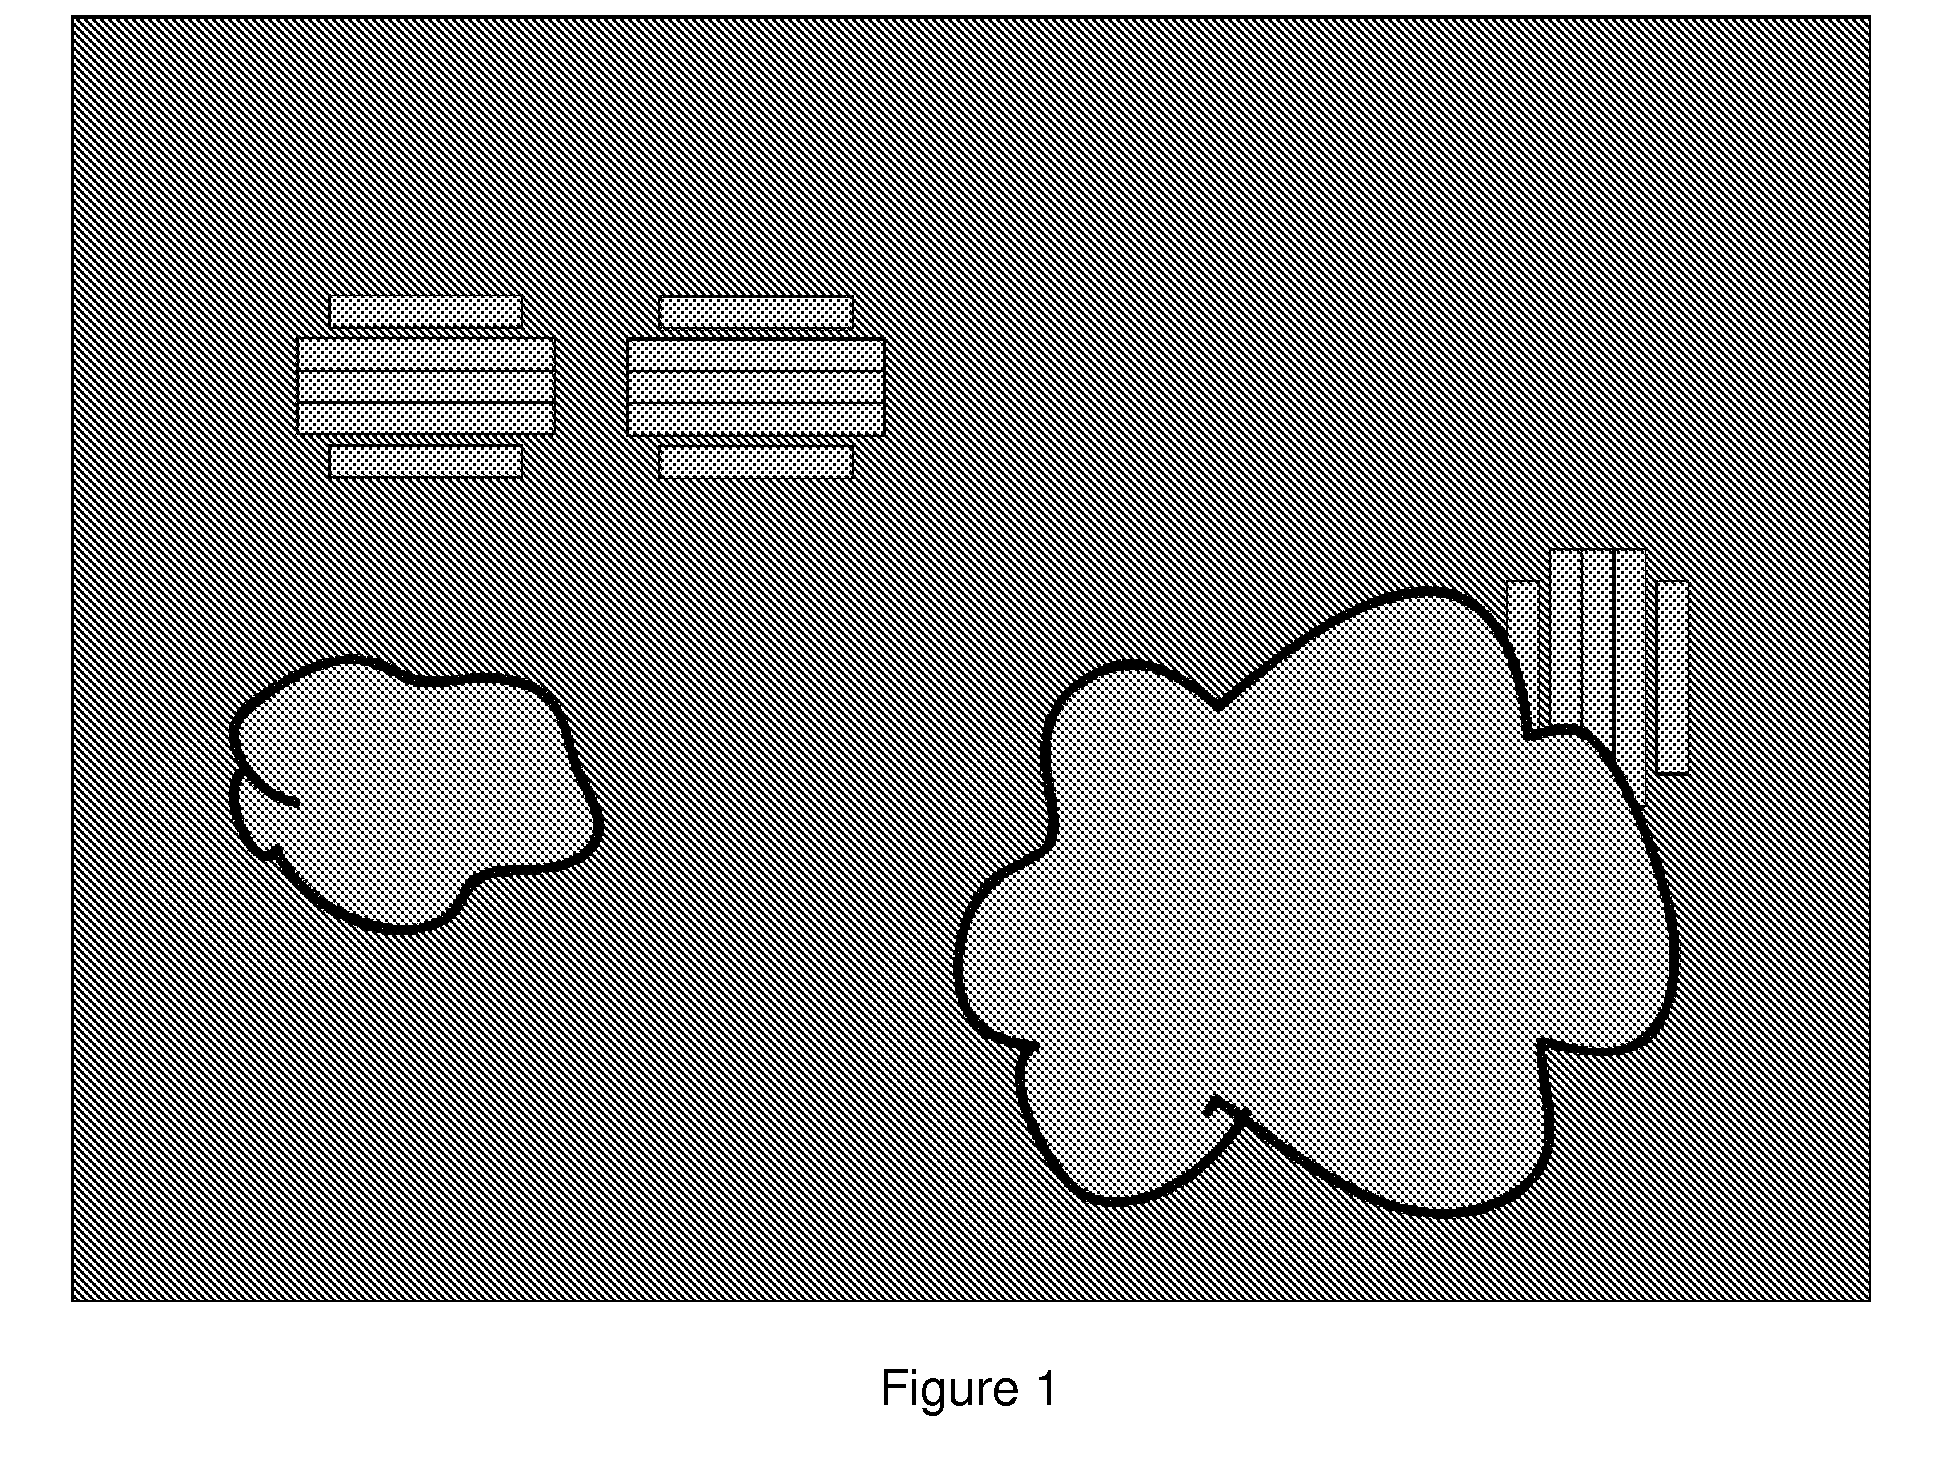 Device and method for measuring a quantity over a spatial region